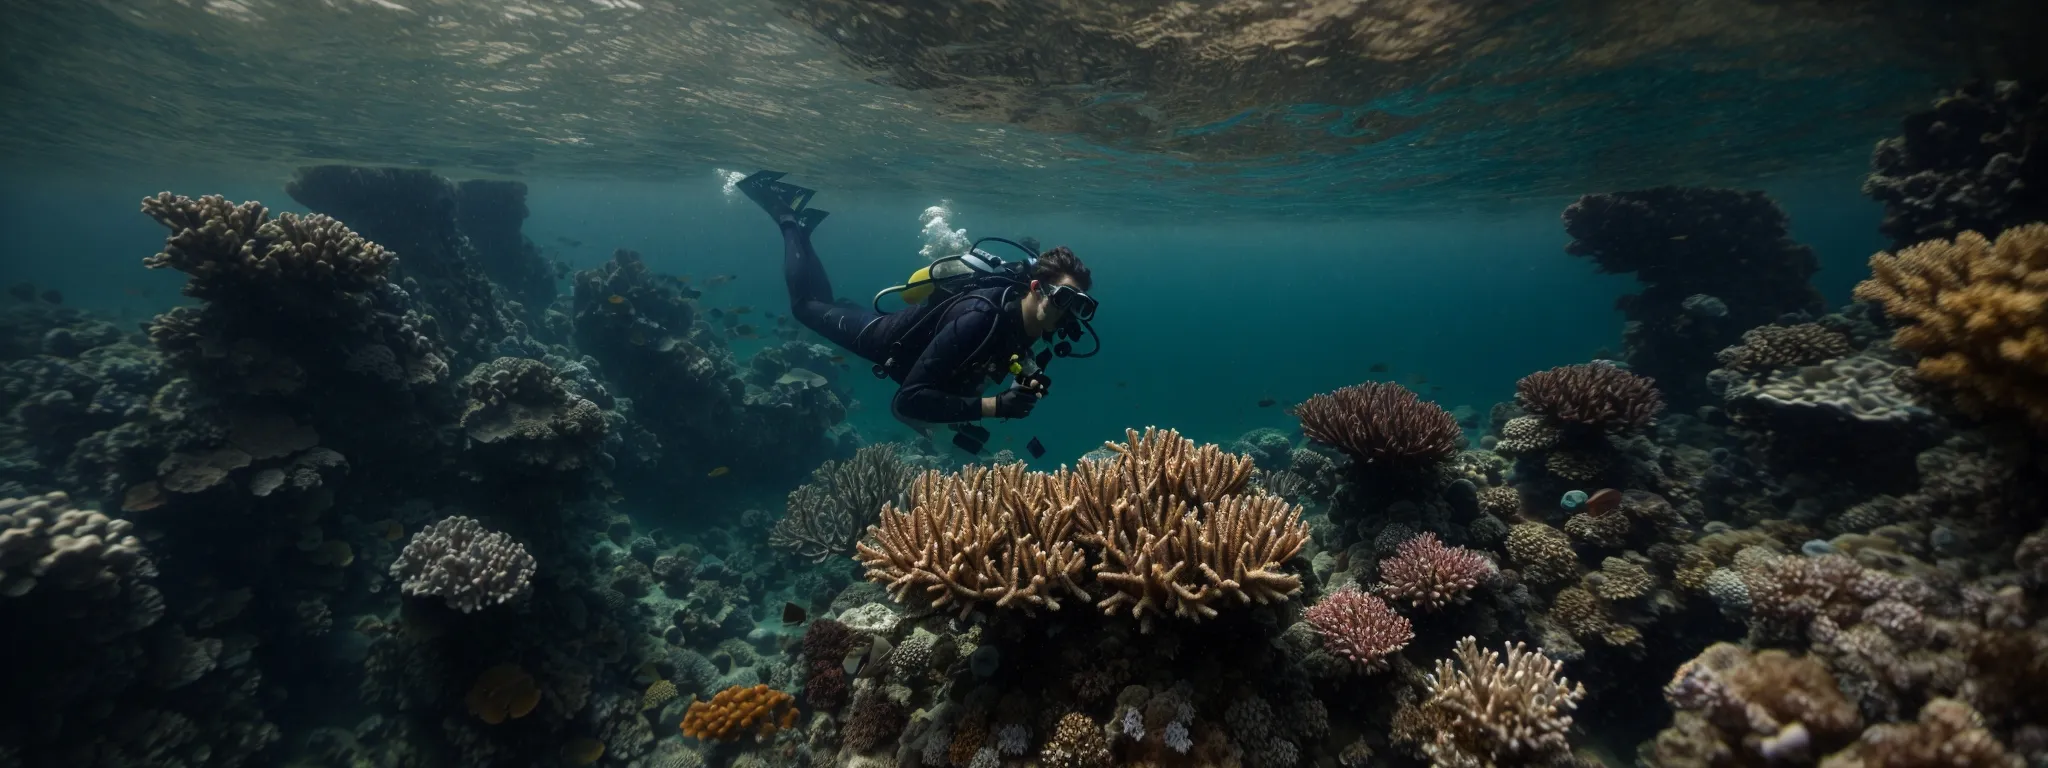 a diver descending with a checklist in hand amid the structural complexity of a coral reef.